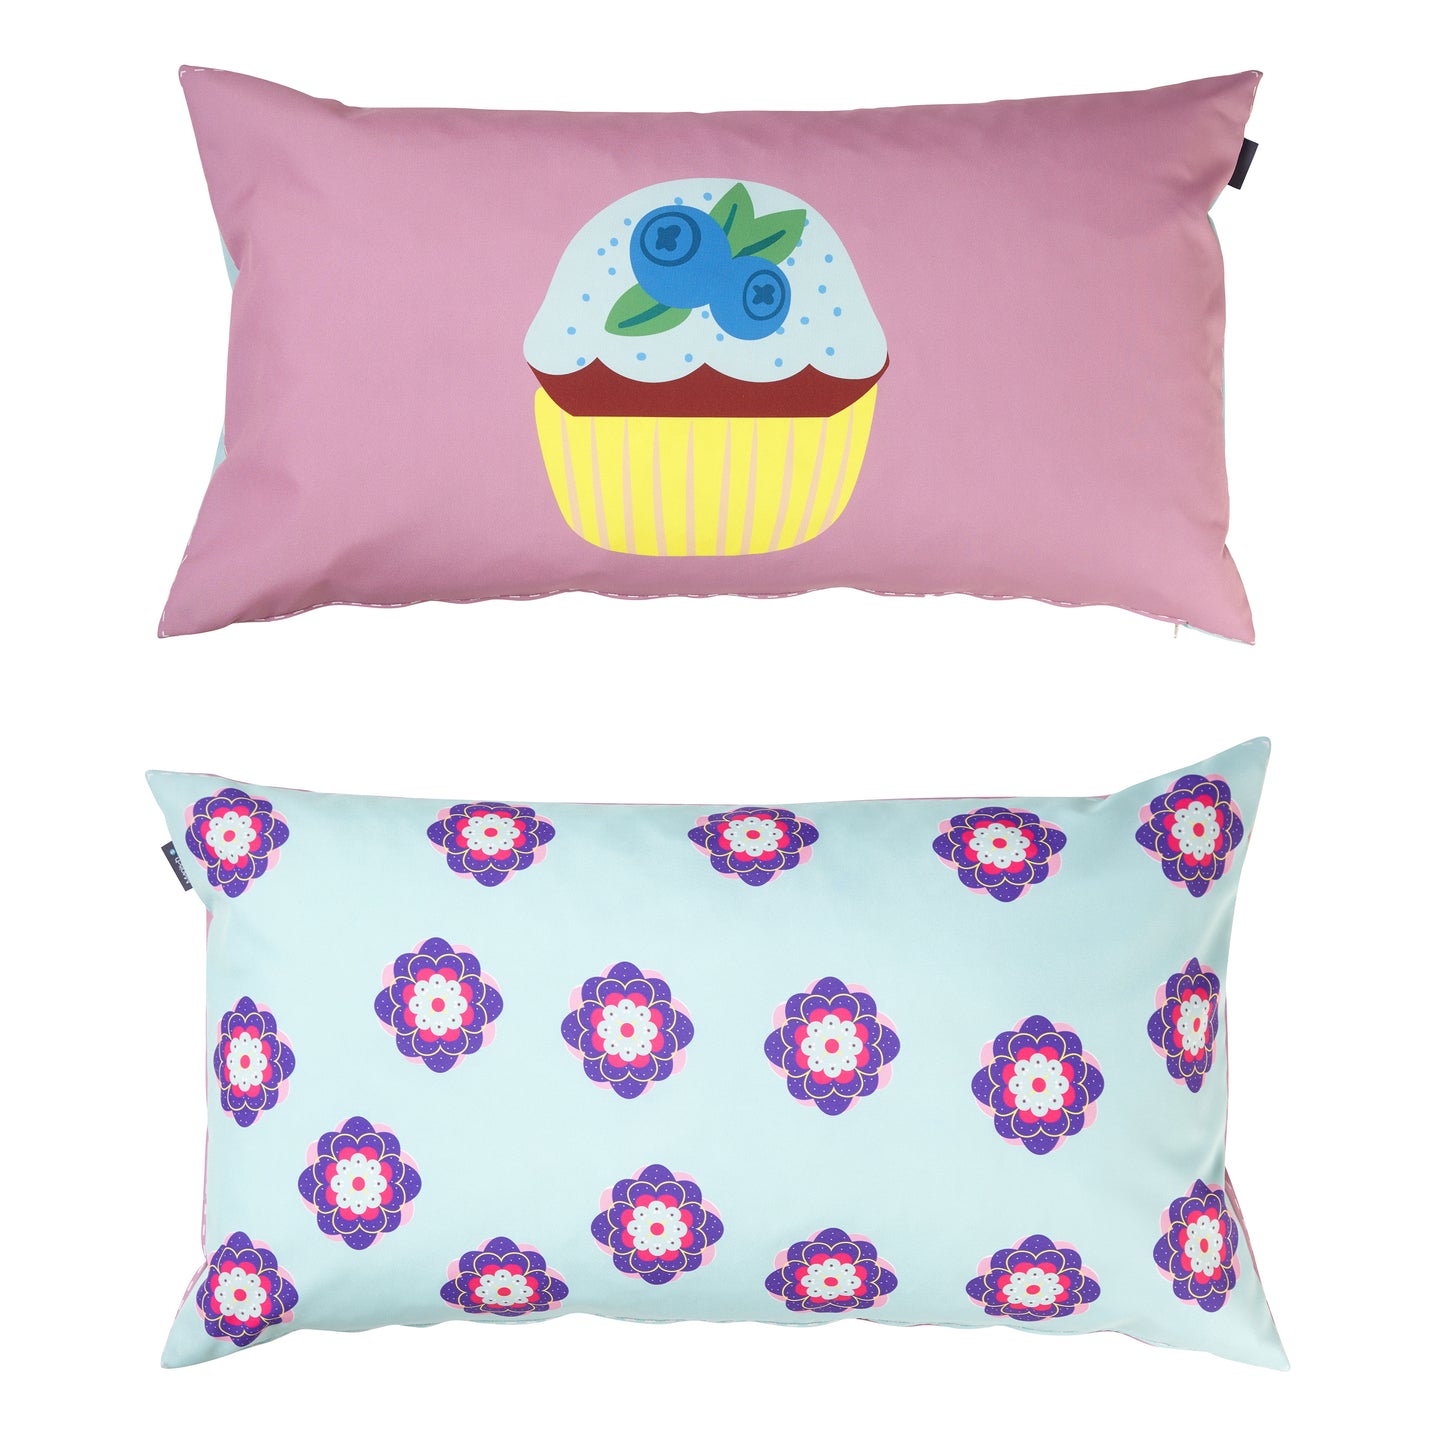 Manis-h  Set of 2 Cushion Covers in a Cup cake & Flower Design